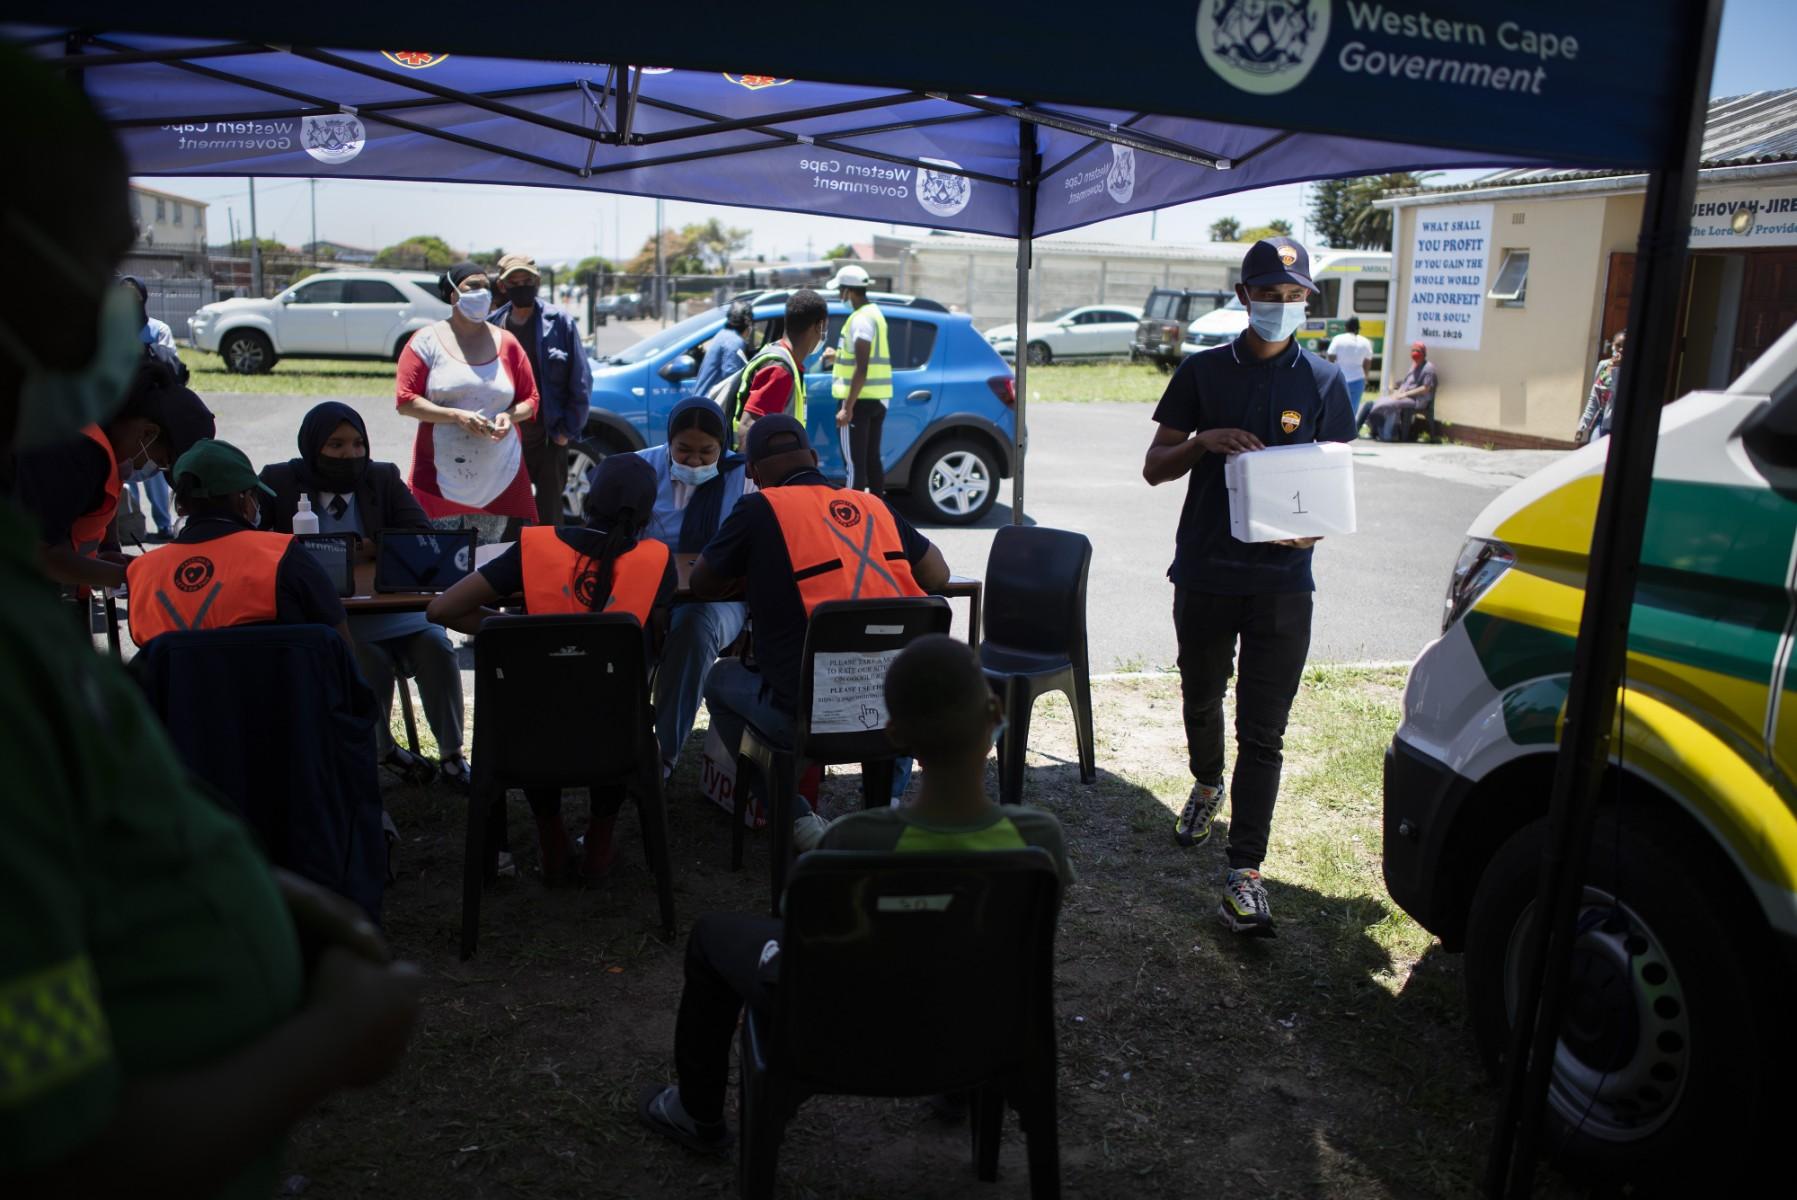 People register before getting vaccinated outside an ambulance which has been converted to facilitate vaccinations at a Covid-19 vaccination event in Manenberg, which is part of the Vaxi-Taxi mobile vaccination drive, on Dec 08, 2021 in Cape Town. Photo: AFP